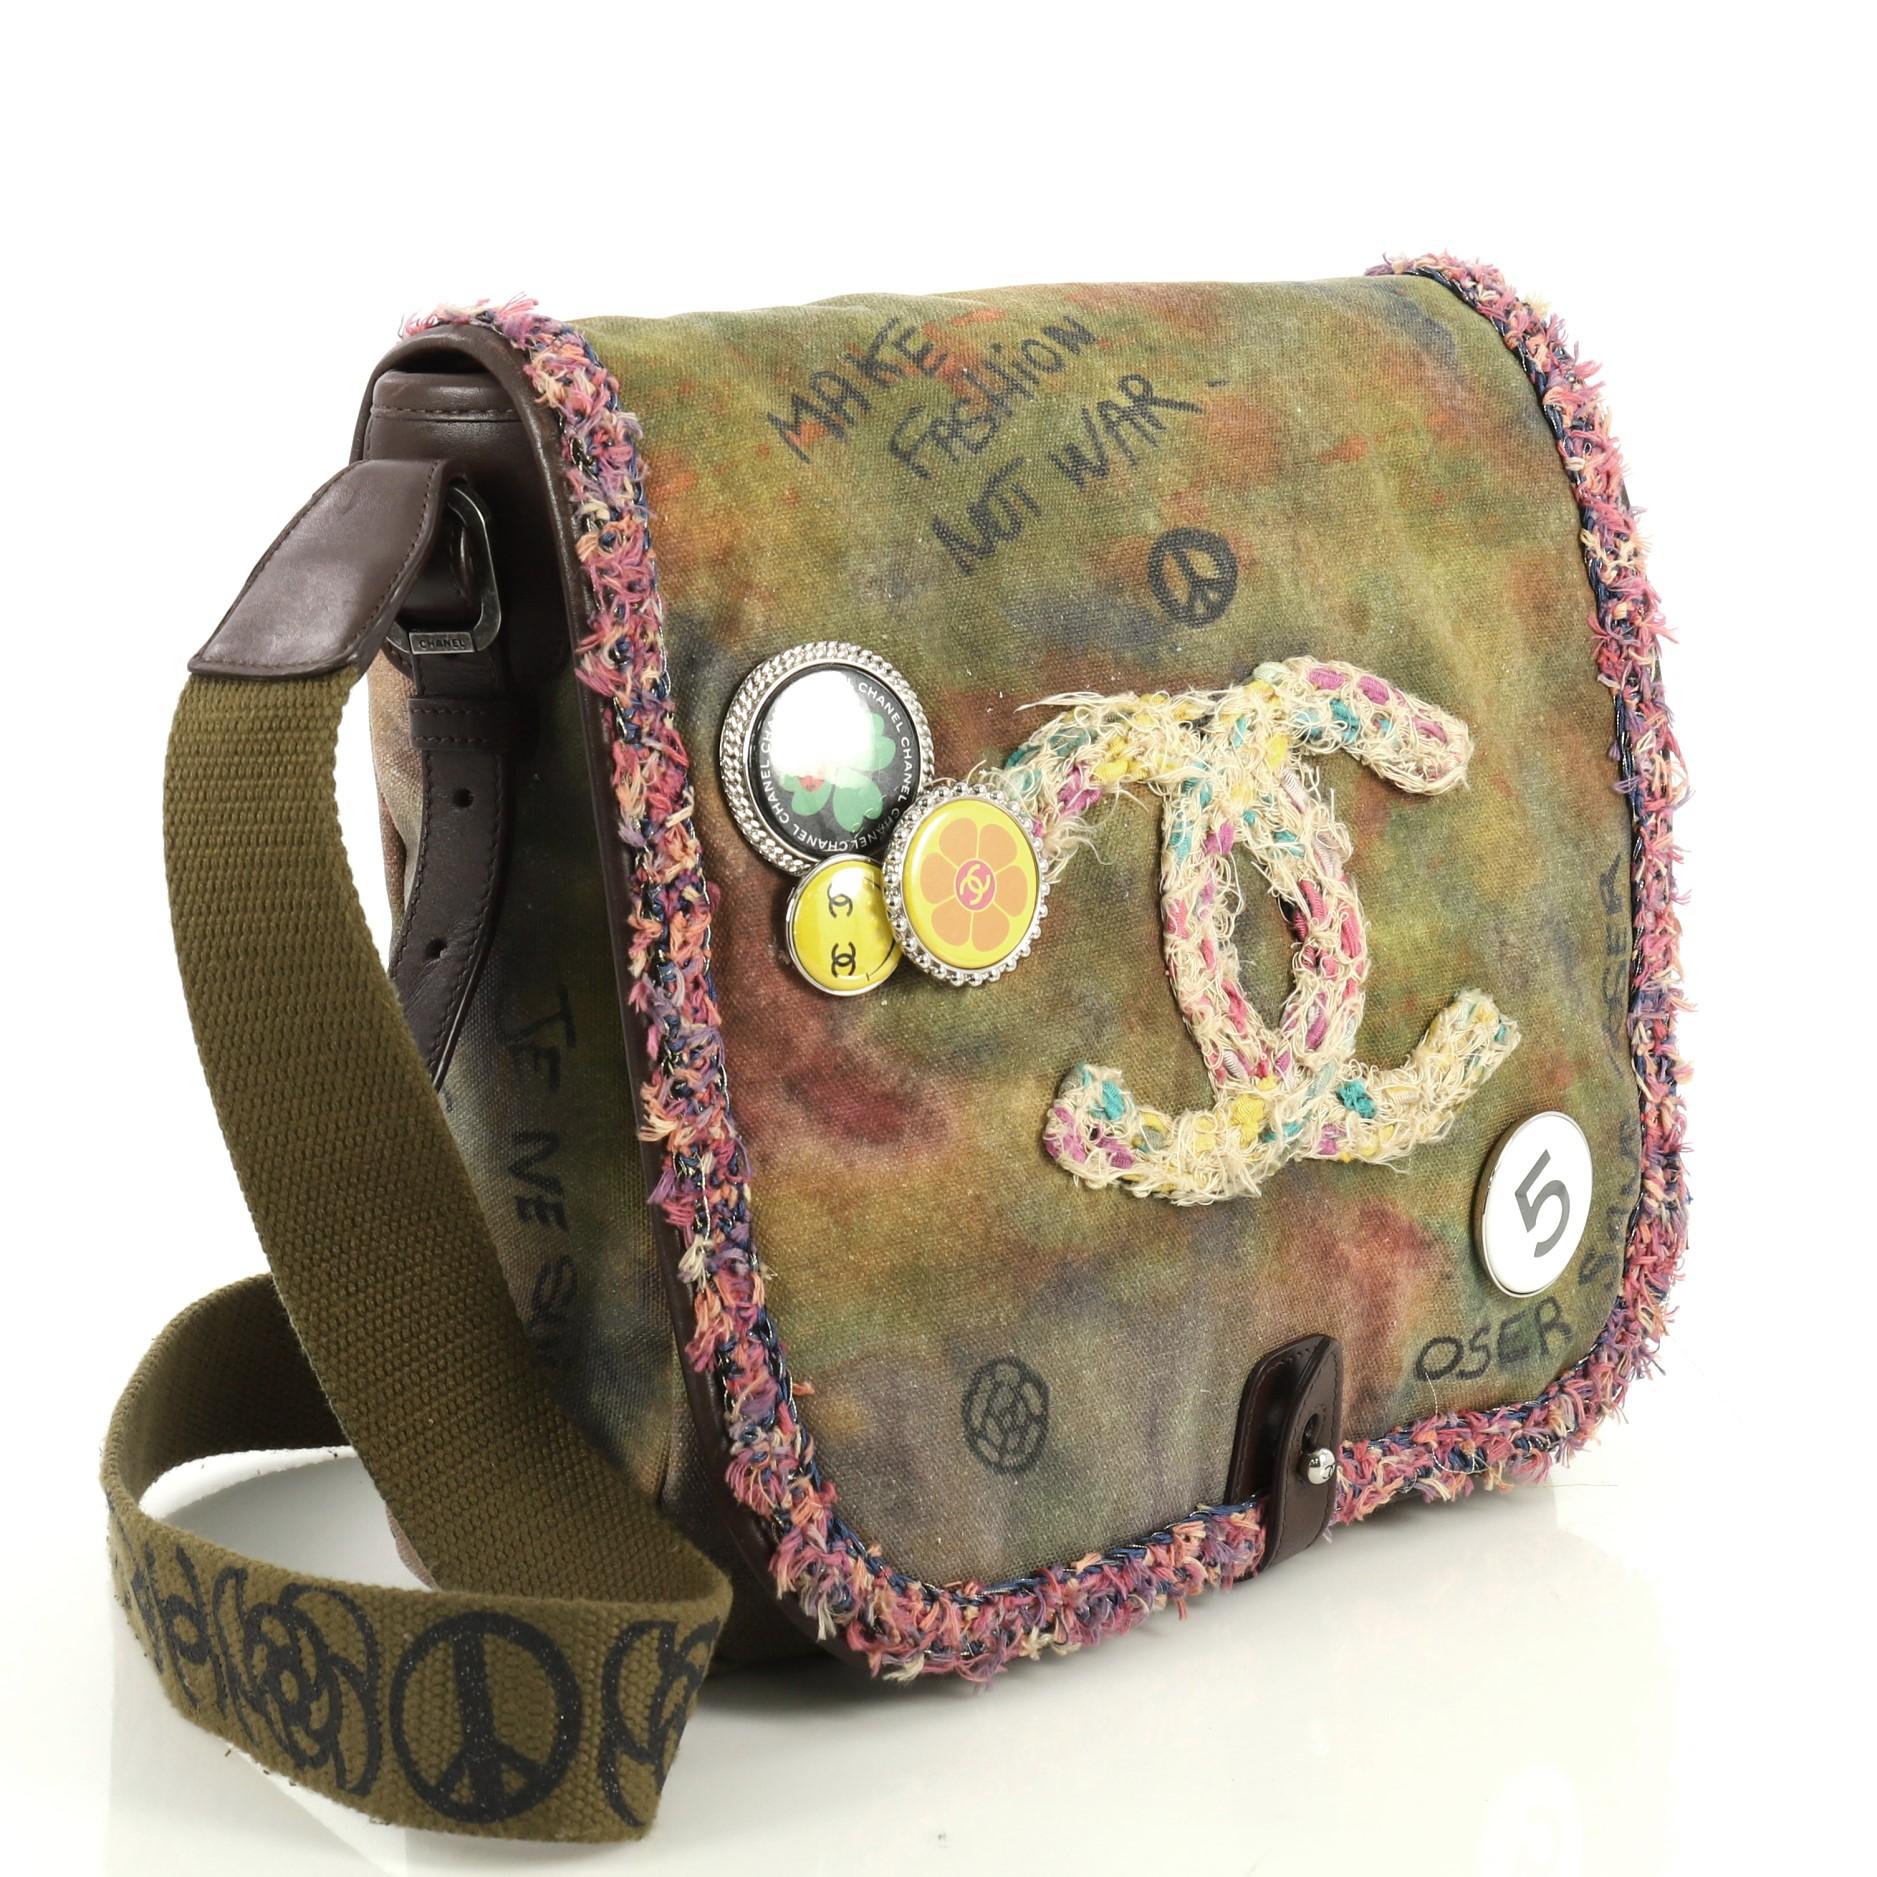 This Chanel On The Pavements Graffiti Messenger Bag Canvas Small, crafted in green printed canvas, features decorative pins, graffiti and spray-painted design, crossbody strap, and ruthenium-tone hardware. Its snap button closure opens to a red